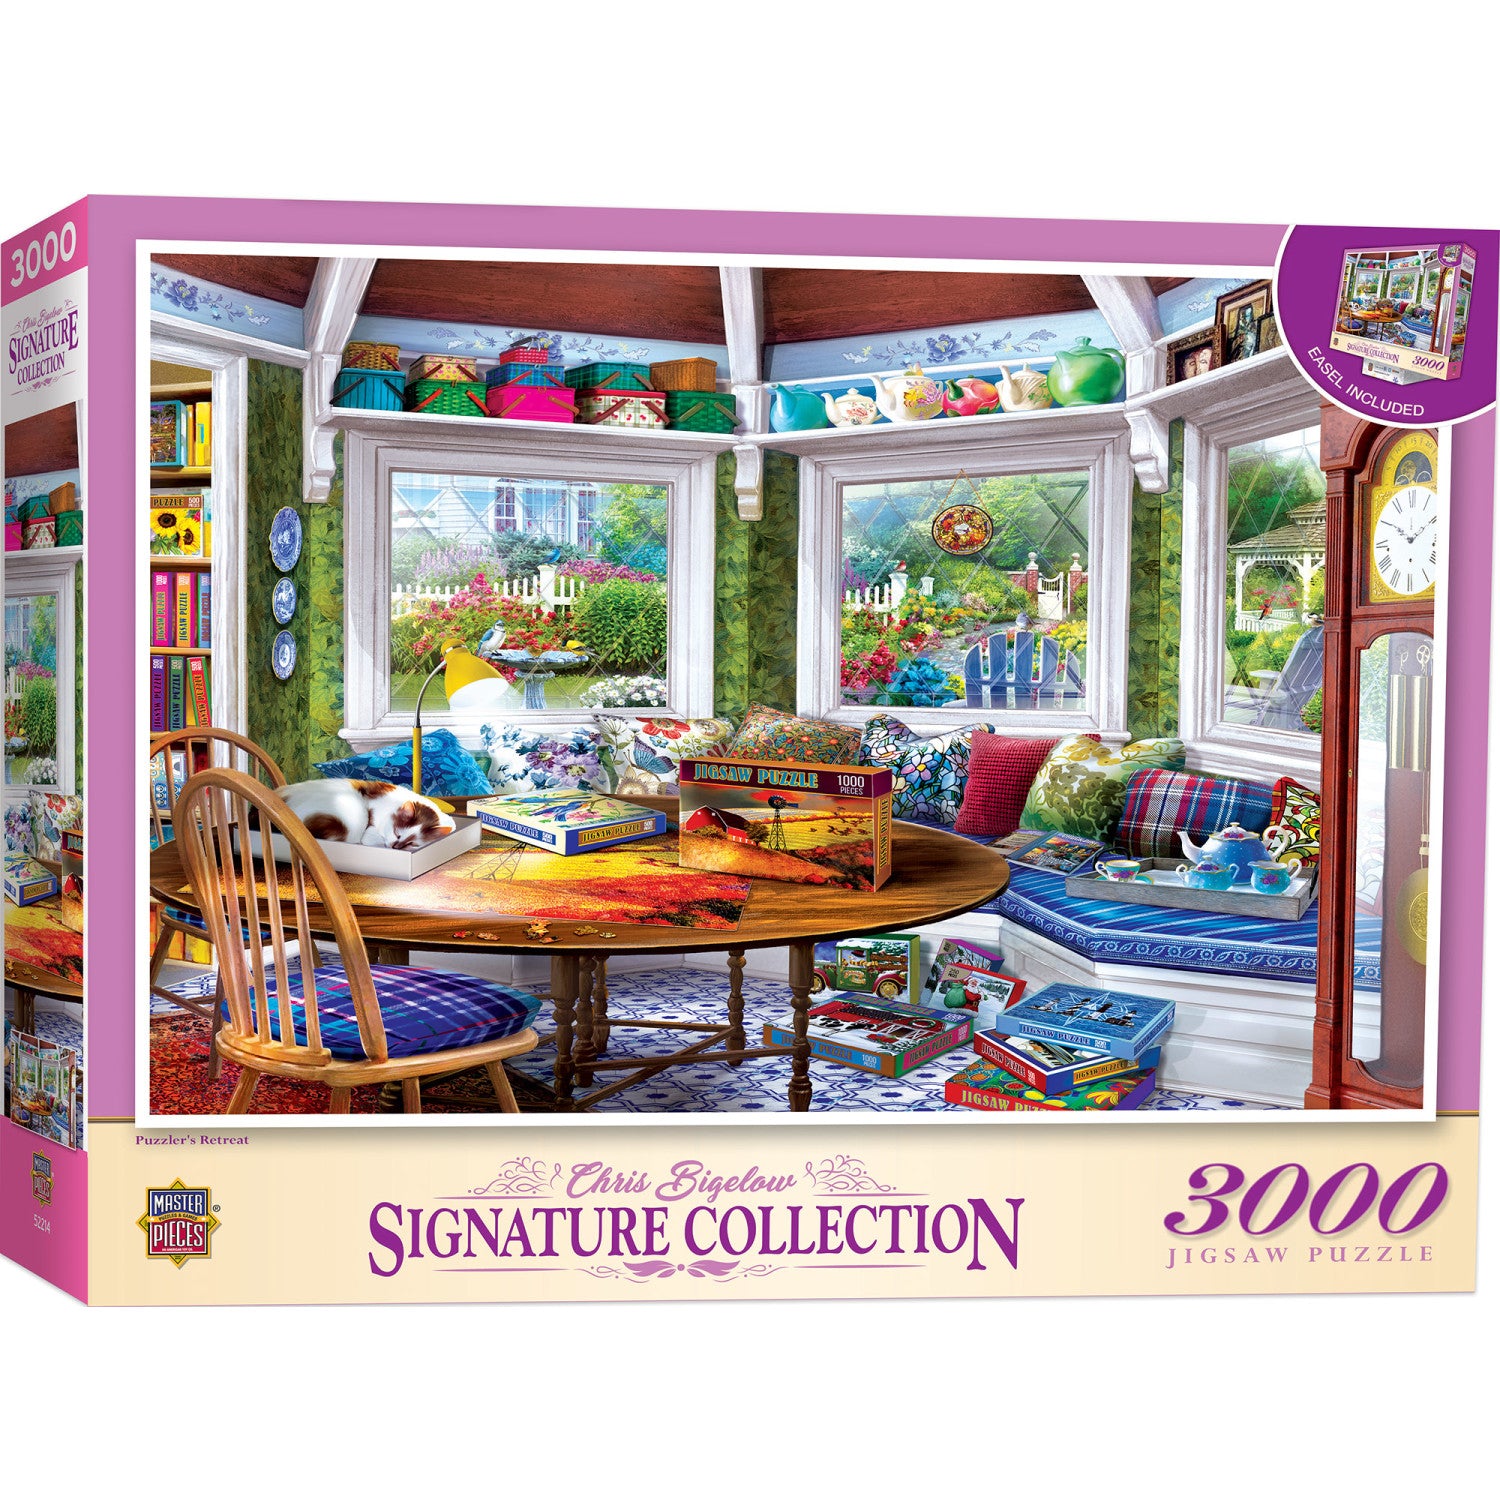 Signature Collection - Puzzler's Retreat 3000 Piece Jigsaw Puzzle - Flawed